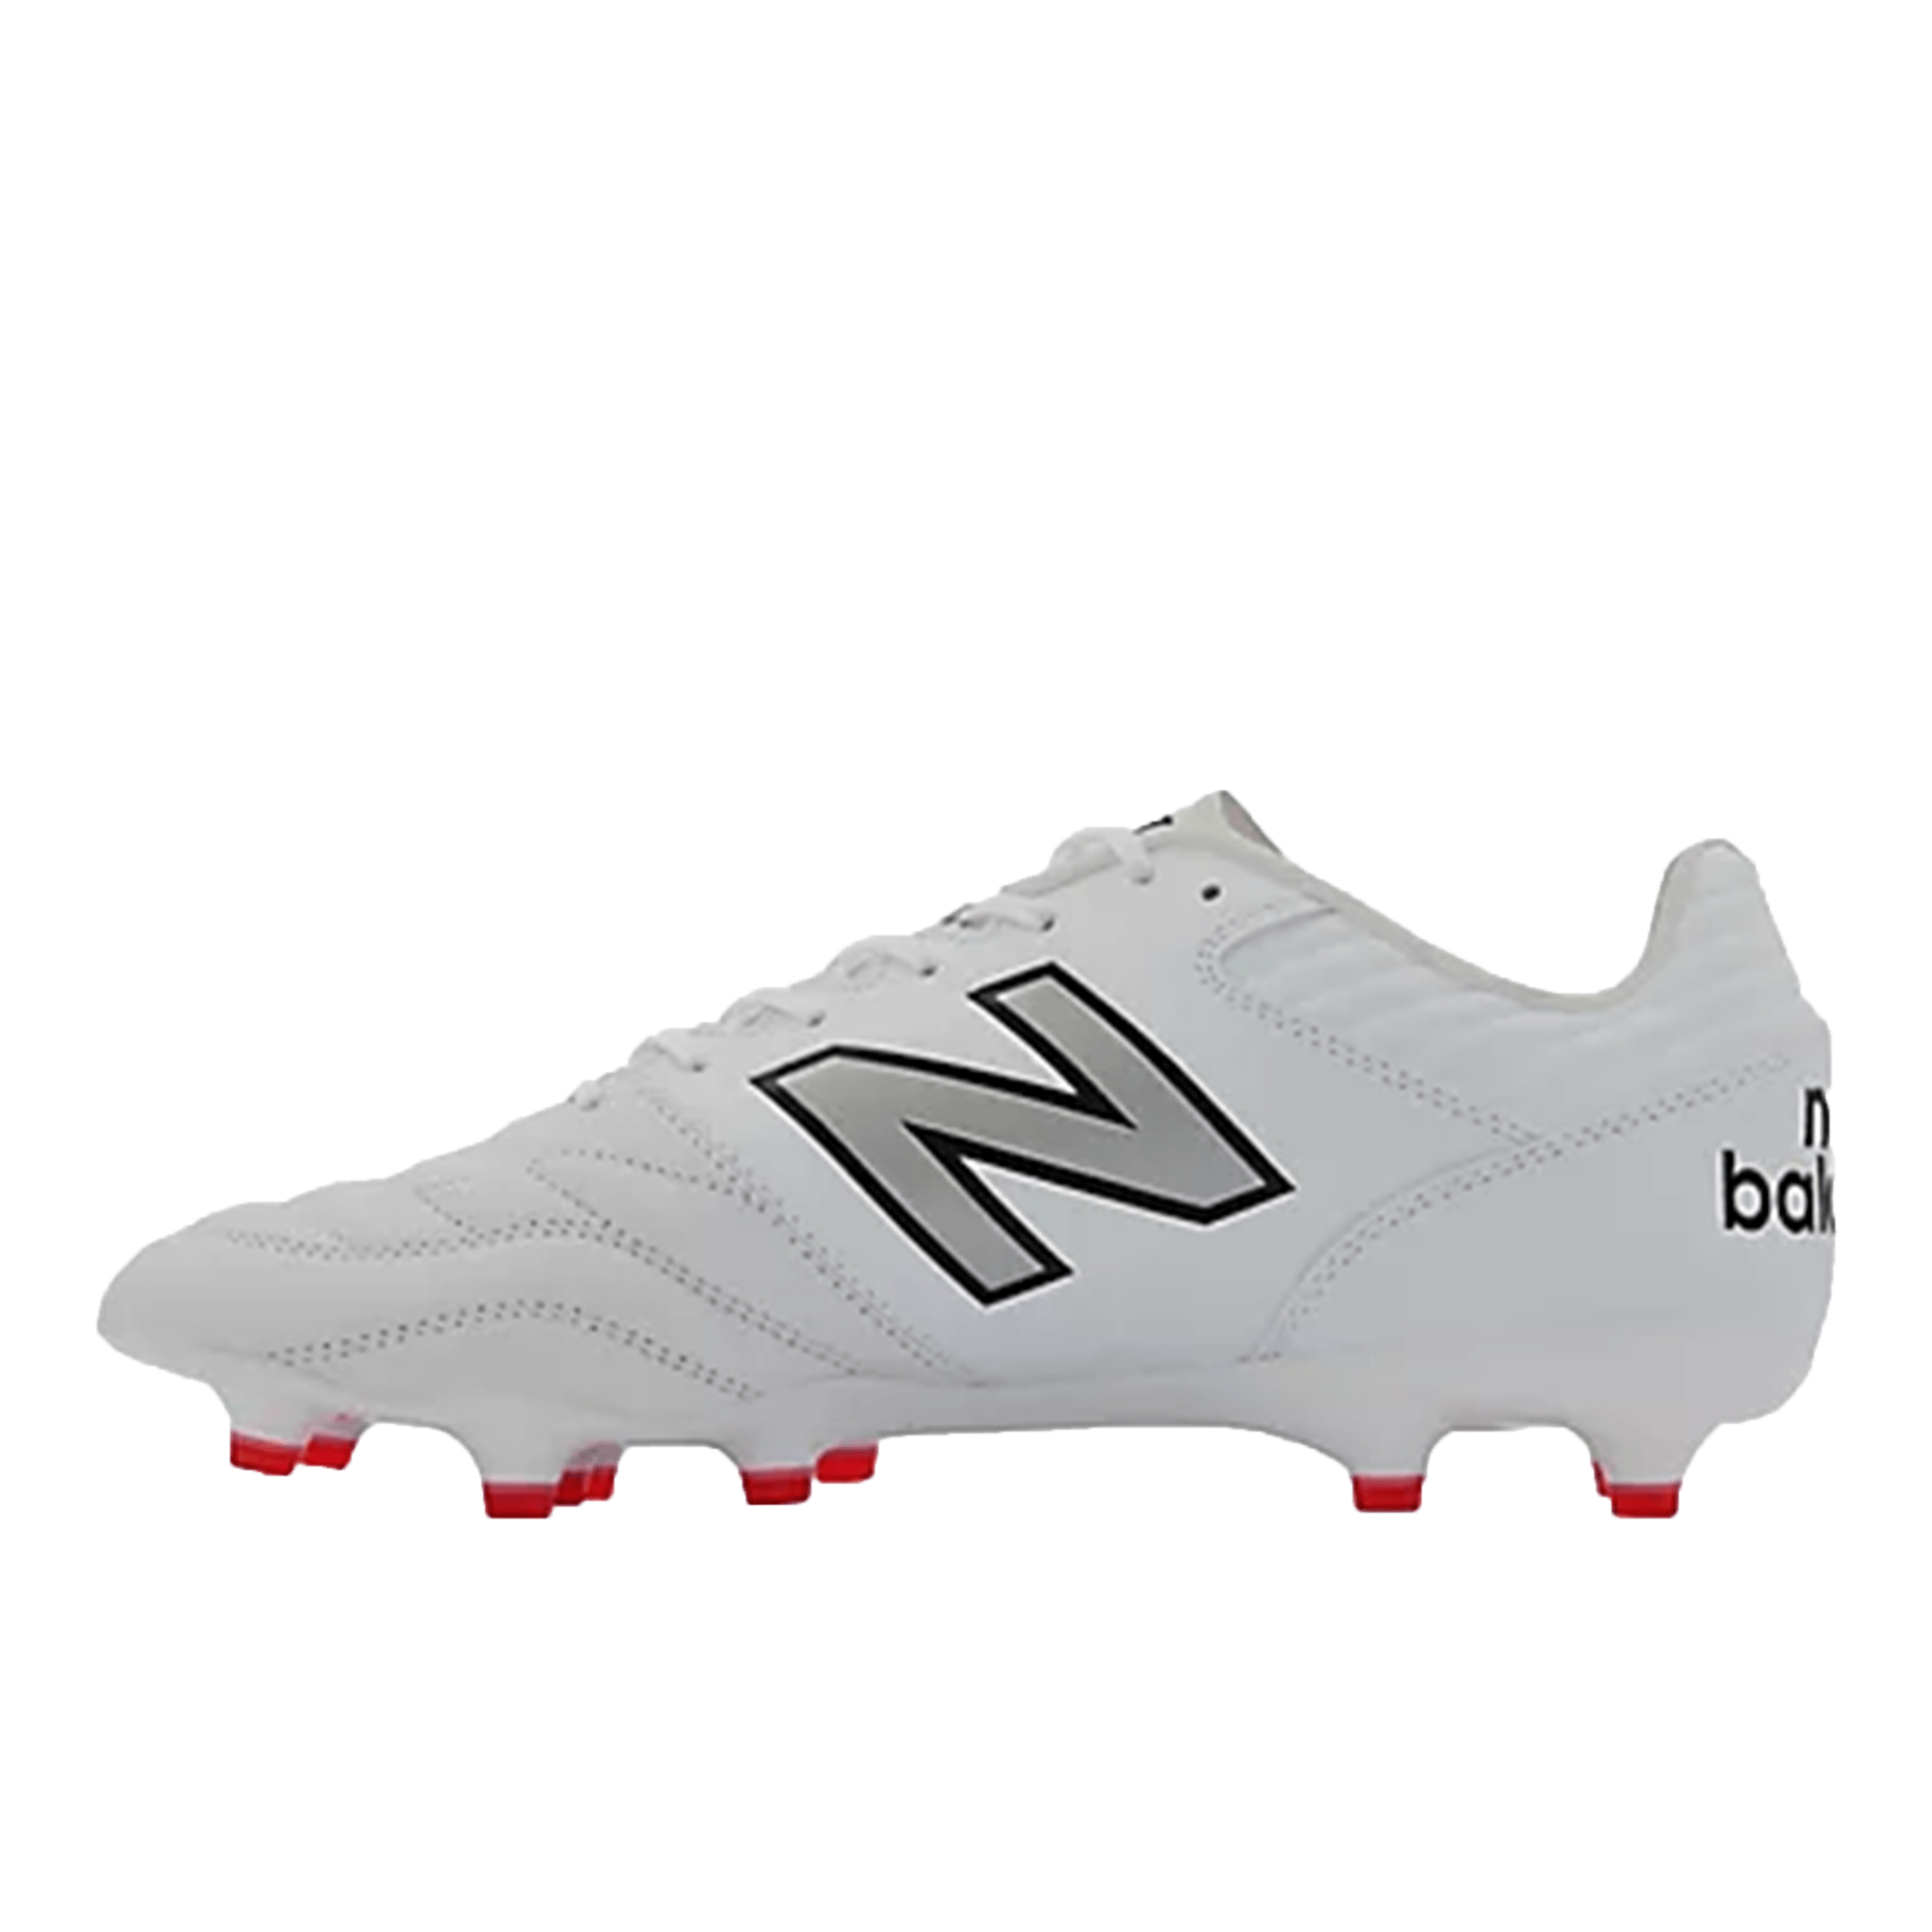 https://www.worldrugbyshop.com/products/new-balance-442-v2-pro-fg-boots-white-silver